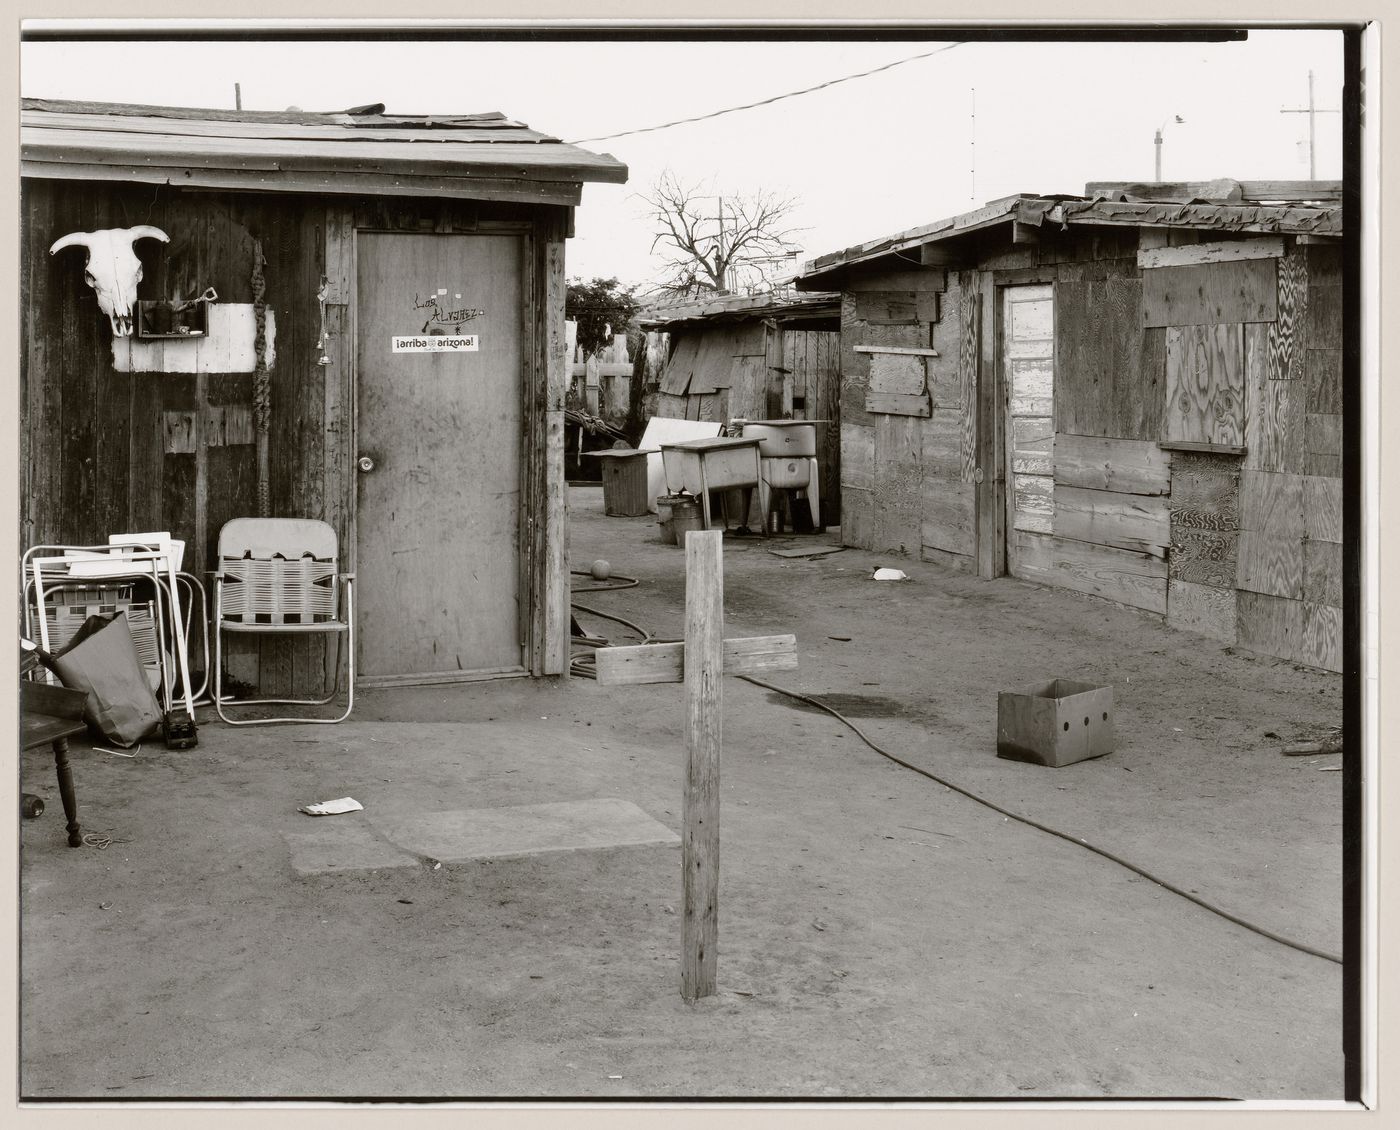 View of cross in yard, Old Pascua, Tucson, Arizona, United States (from a series documenting the Yaqui community of Old Pascua)